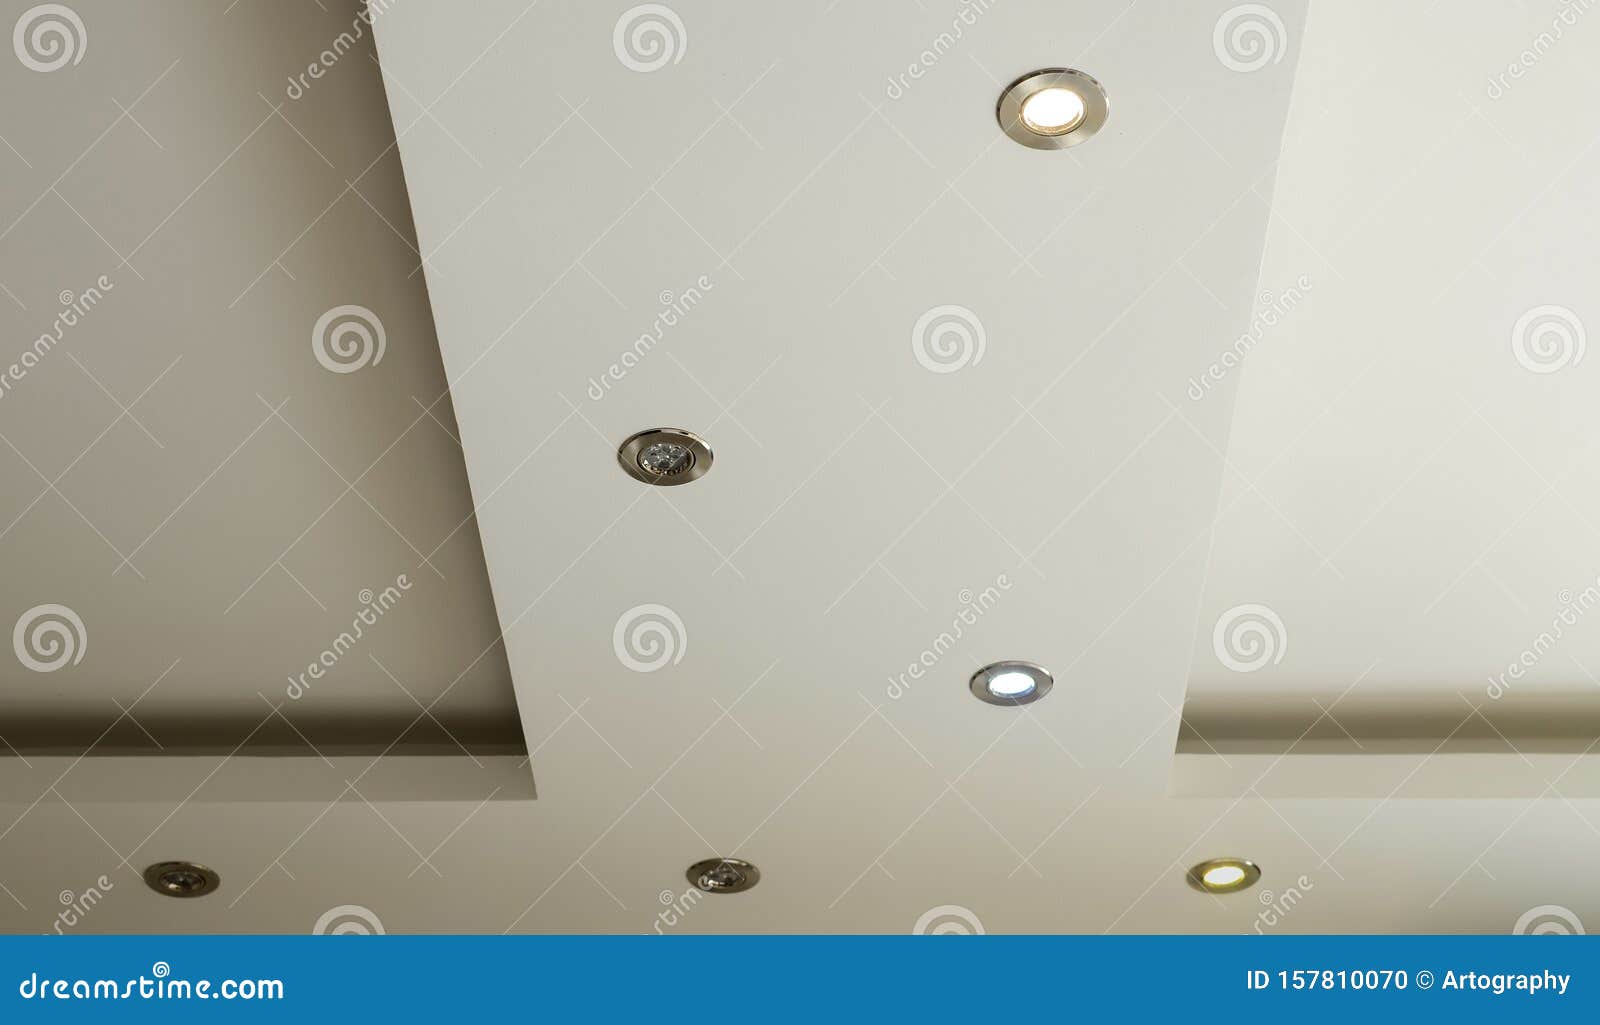 Ceiling Halogen Spots Stock Photo Image Of Plastered